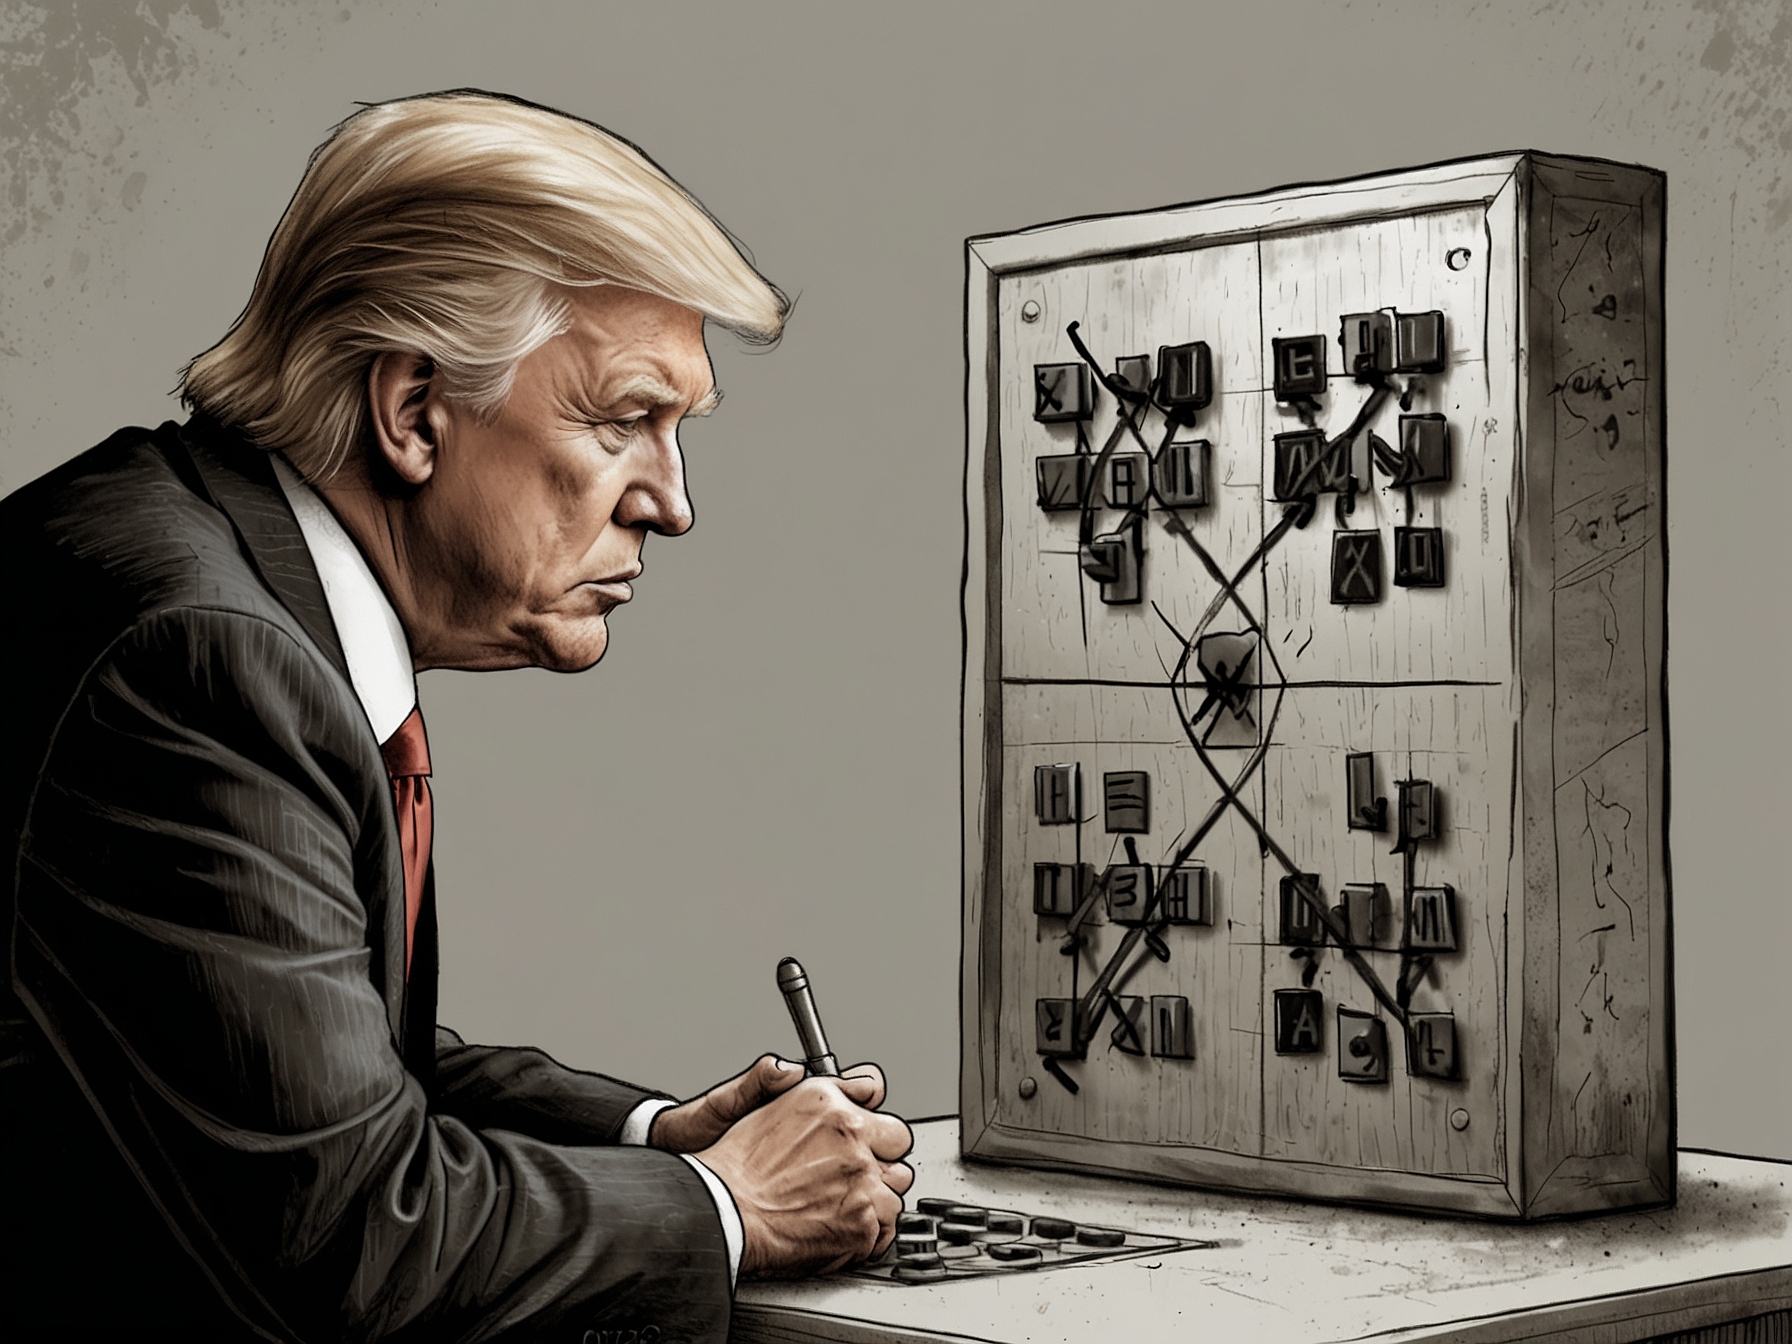 A cartoon of former President Trump struggling at a Tic-Tac-Toe board, emphasizing his confrontational and simplistic tactics in international relations compared to Biden's complex strategies.